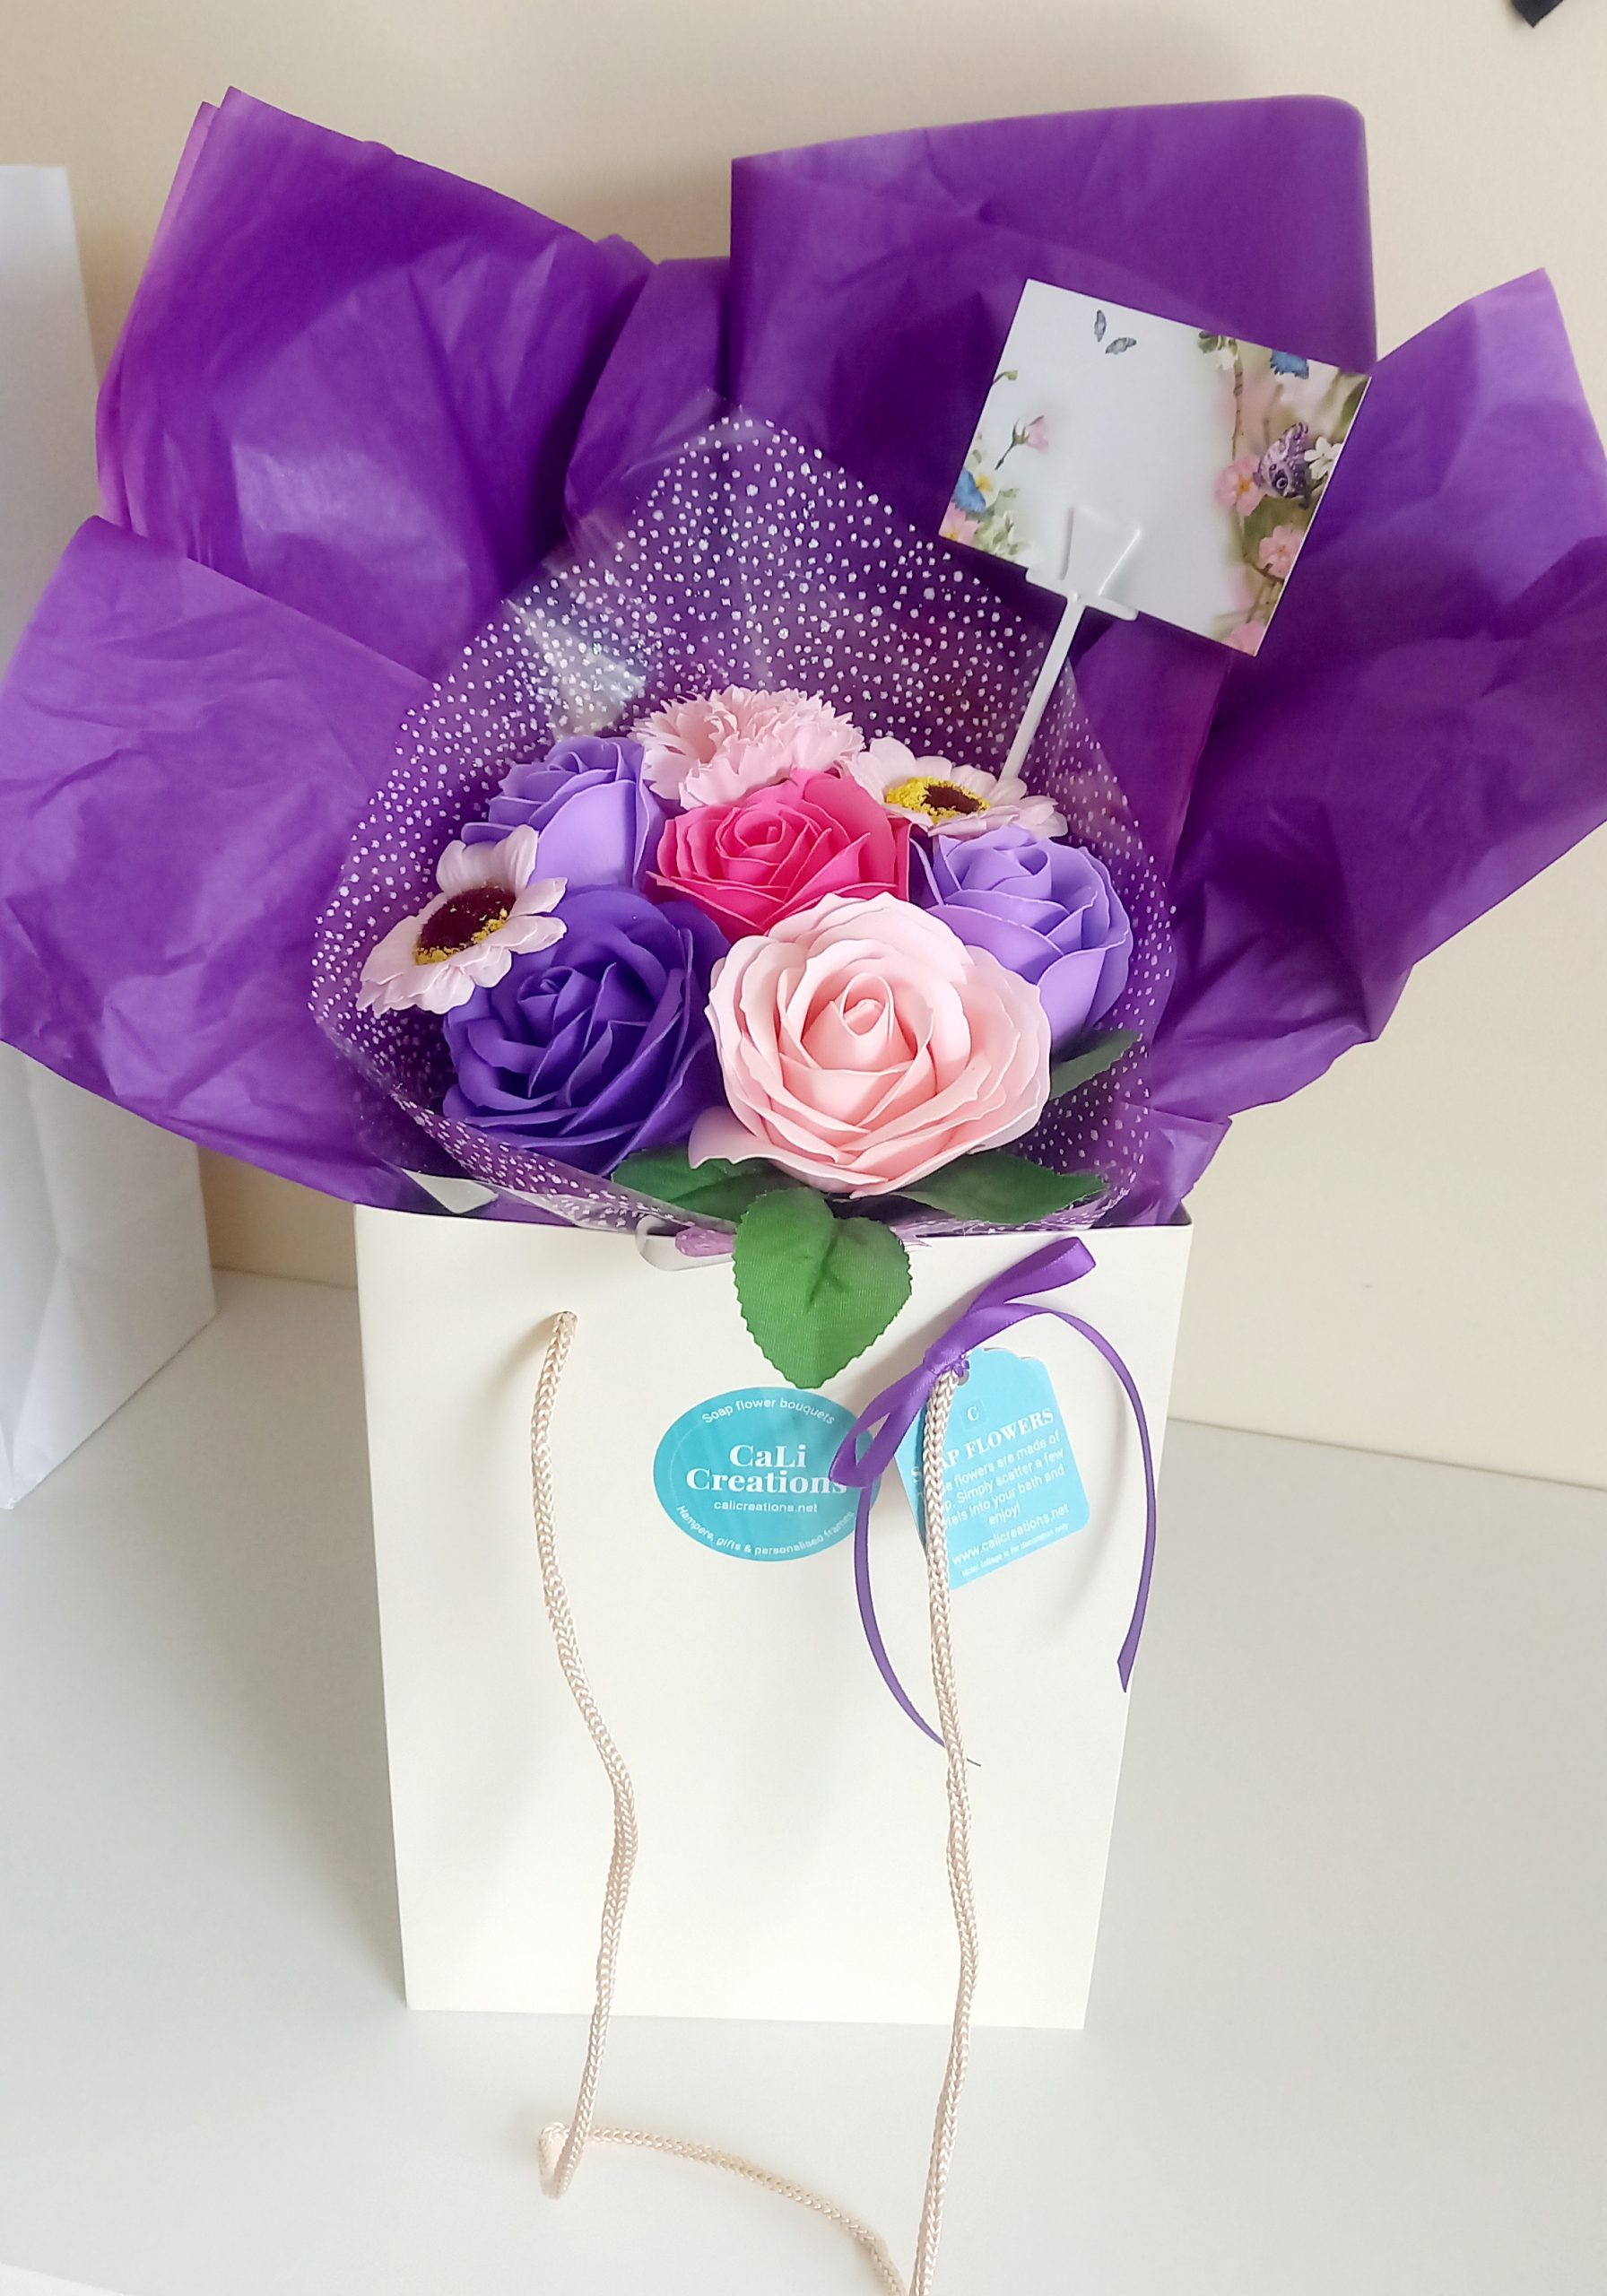 cream flower bag with pink and purple flowers